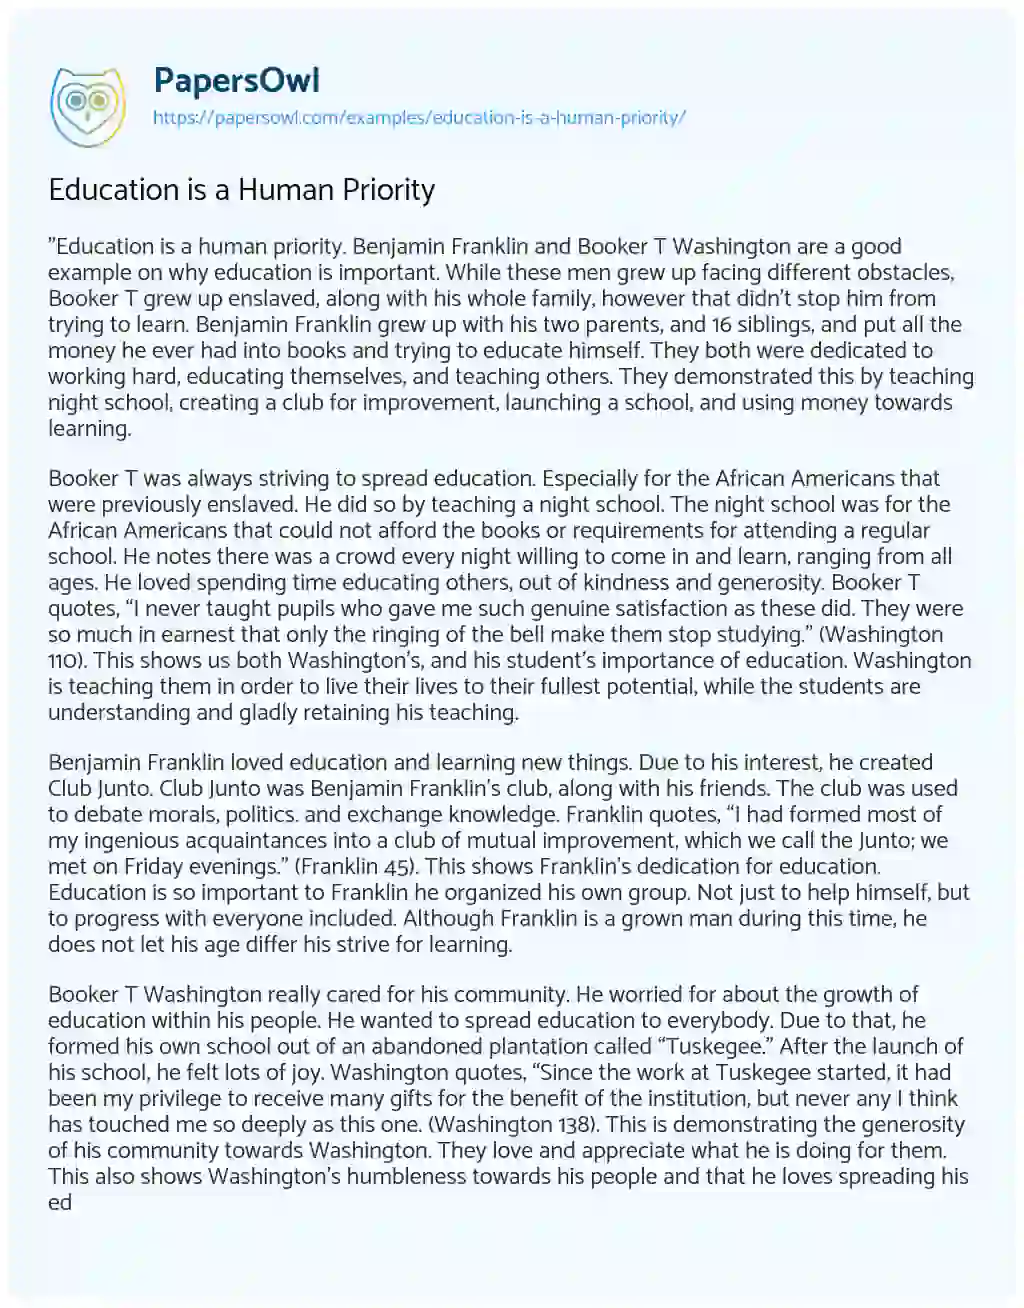 Education is a Human Priority essay